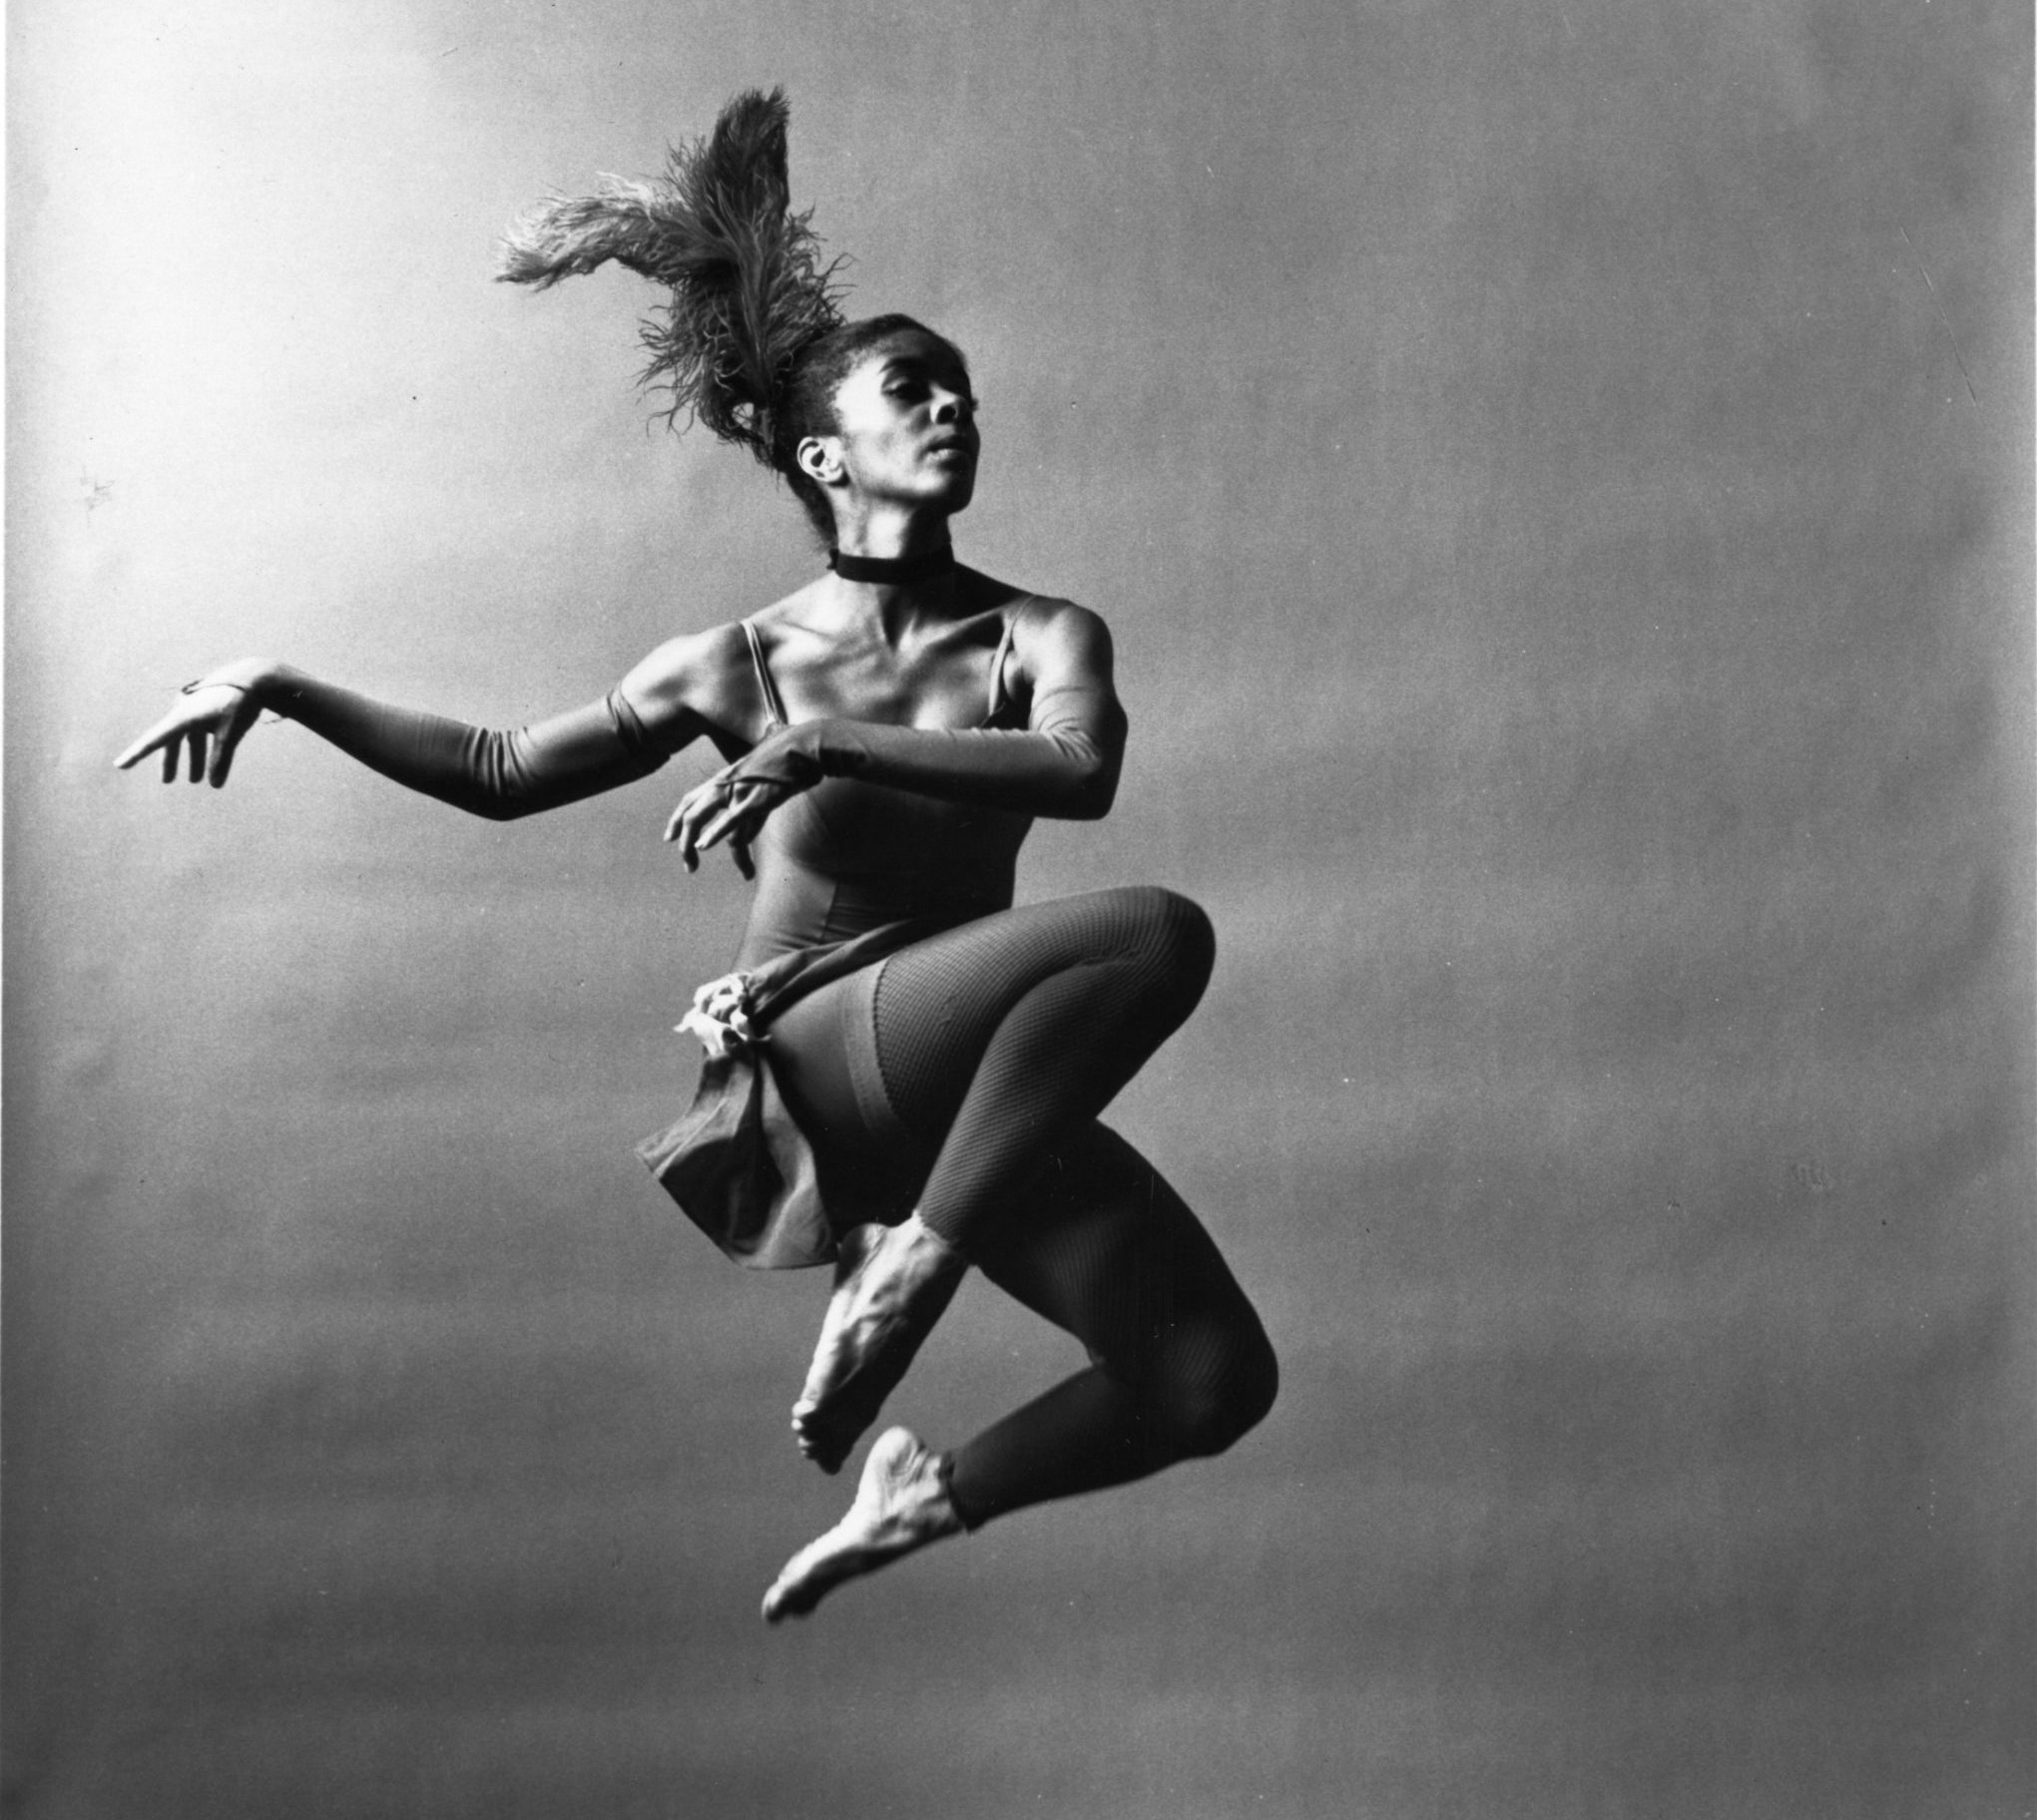 Black and white image of modern dance icon Carolyn Adams mid air in a jump